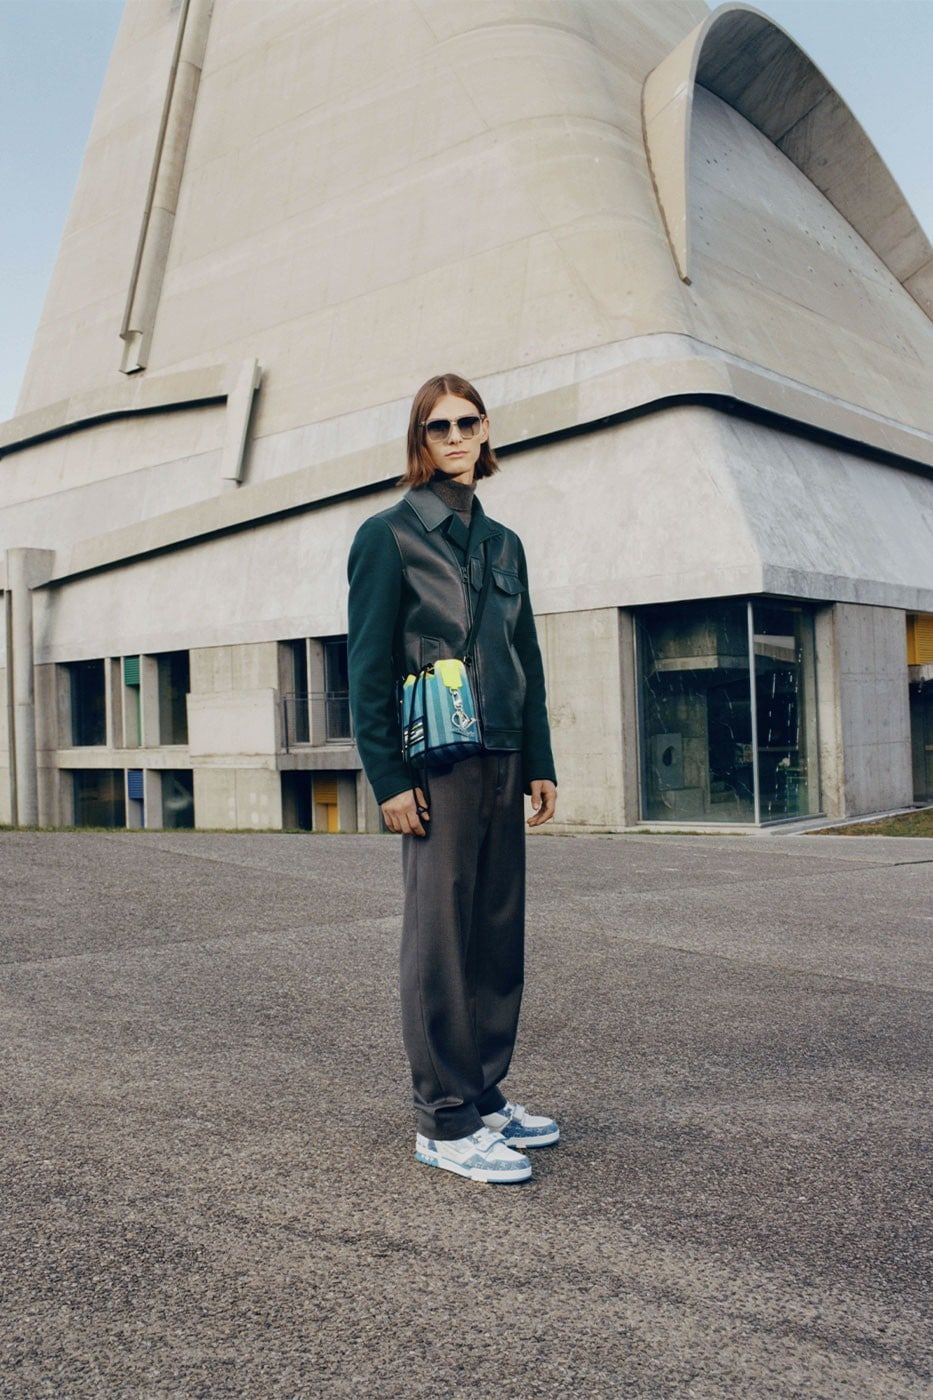 Louis Vuitton presents the continuation of Pre-Fall 22 by Virgil Abloh